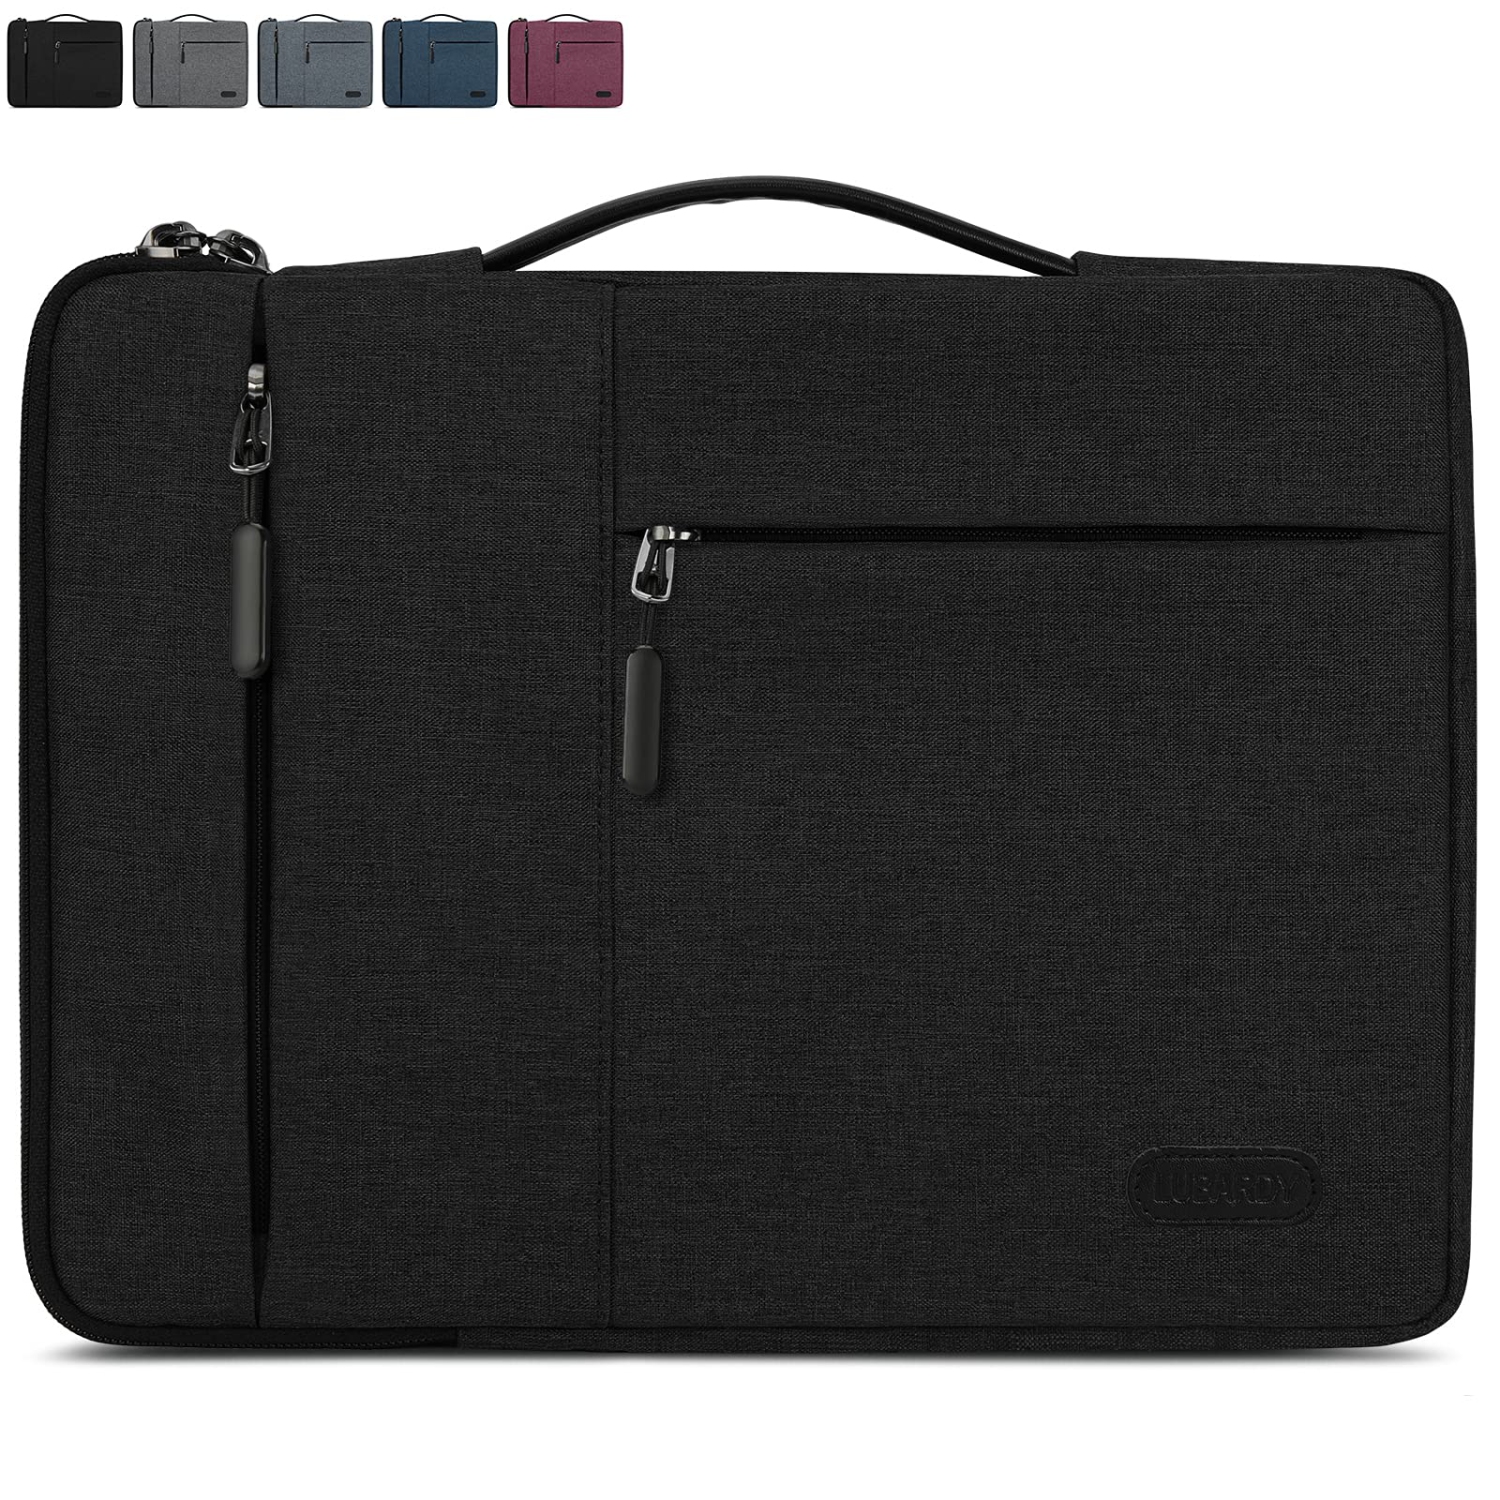 Laptop Sleeve 13-14 inch Waterproof Business Laptop case Compatible with 13 MacBook air pro case Notebook Protective Handbag